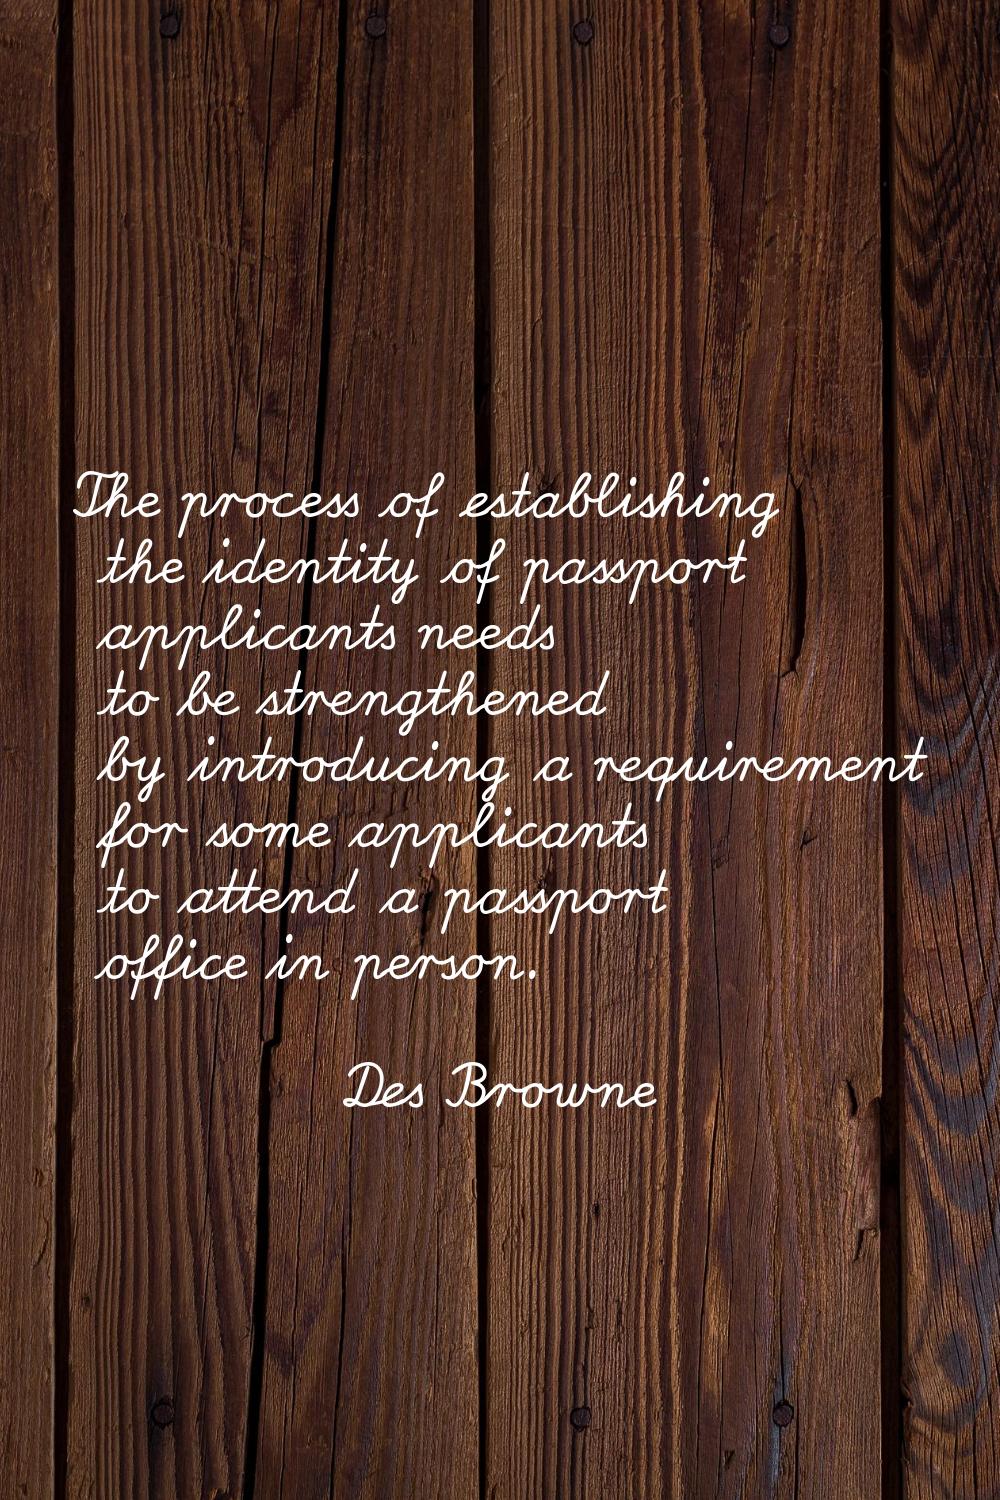 The process of establishing the identity of passport applicants needs to be strengthened by introdu